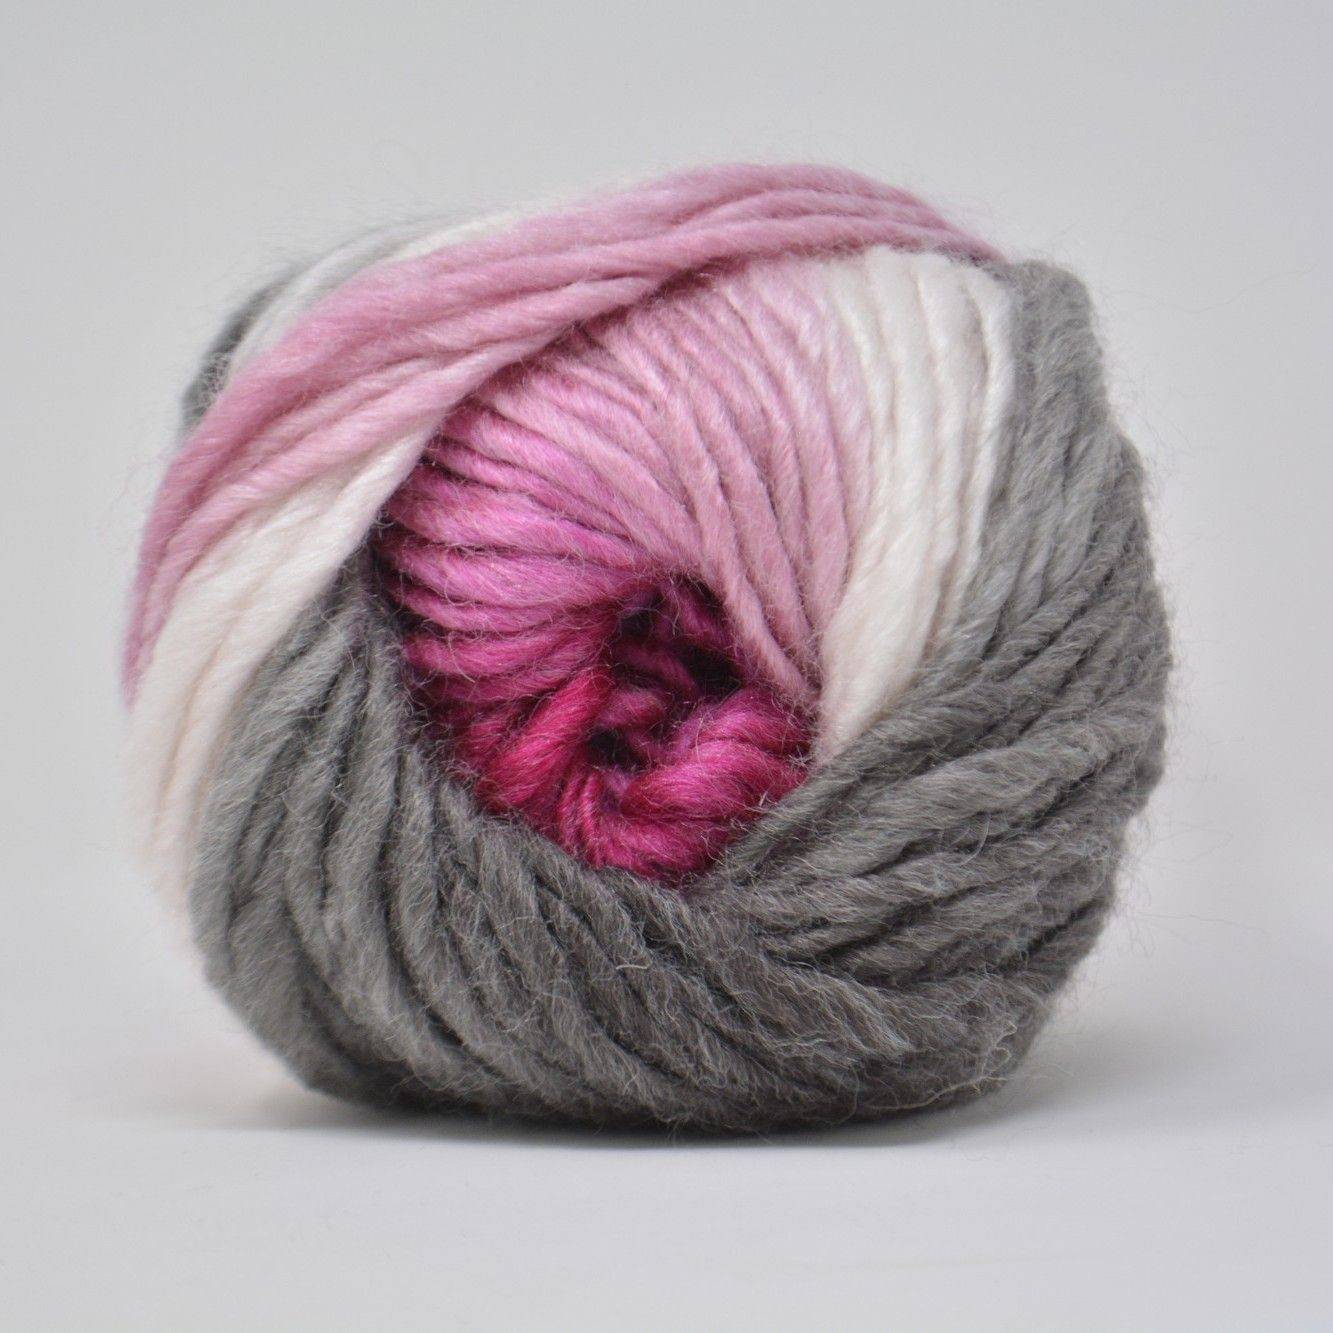 King Cole Riot Chunky - Woodland (3880) | The Knitting Network